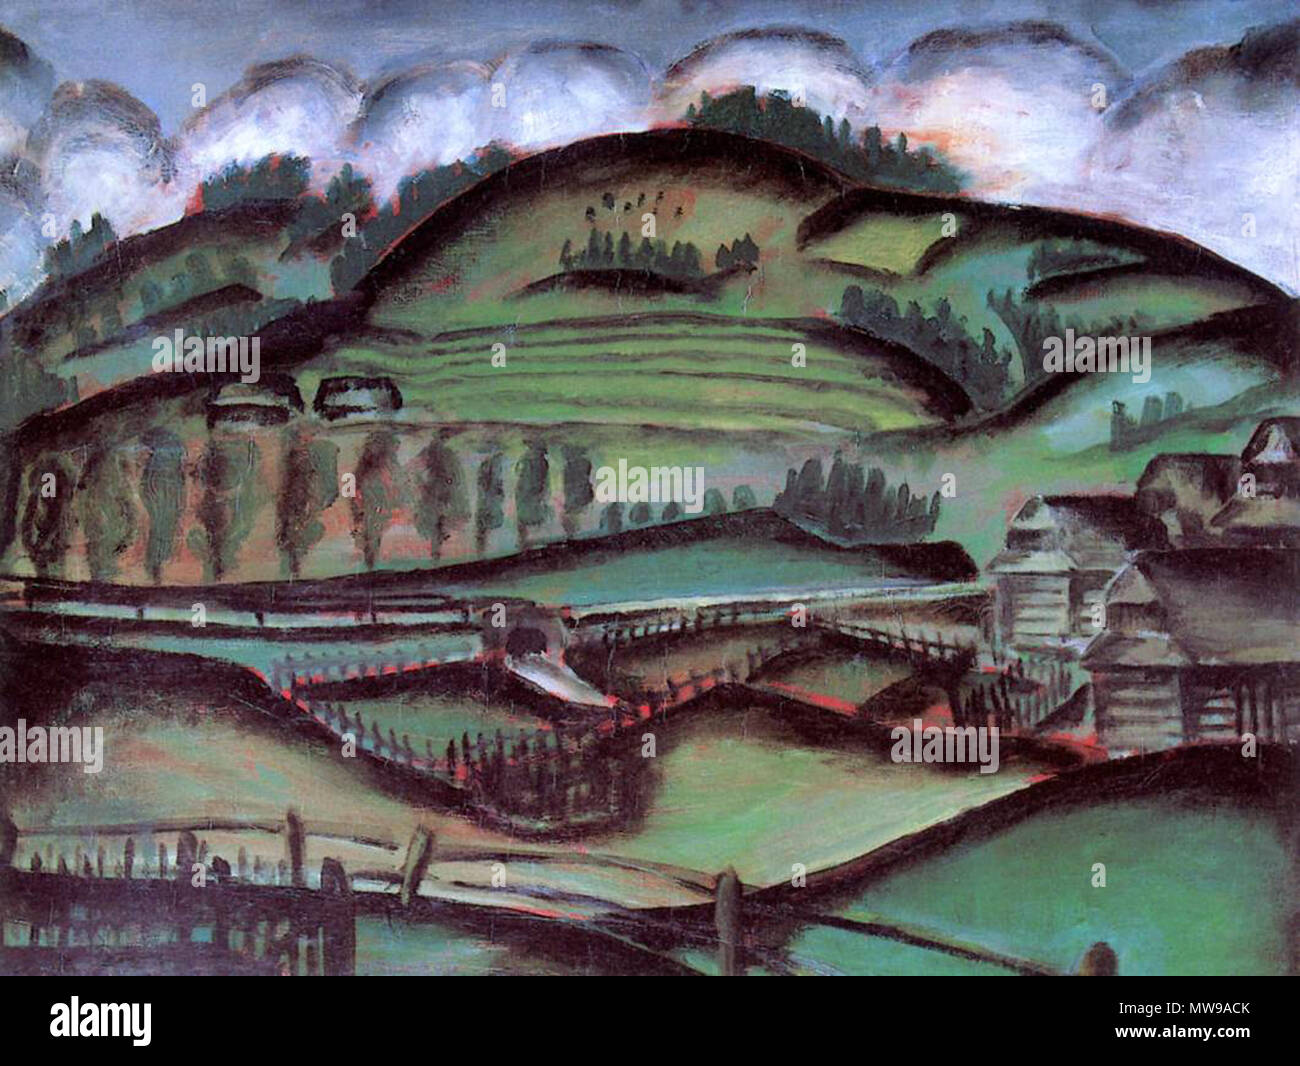 . This file has no description, and may be lacking other information. Please provide a meaningful description of this file. . Ede Bohacsek (1889-1915) 89 Bohacsek, Ede - Landscape, Mountain Village (1913) Stock Photo